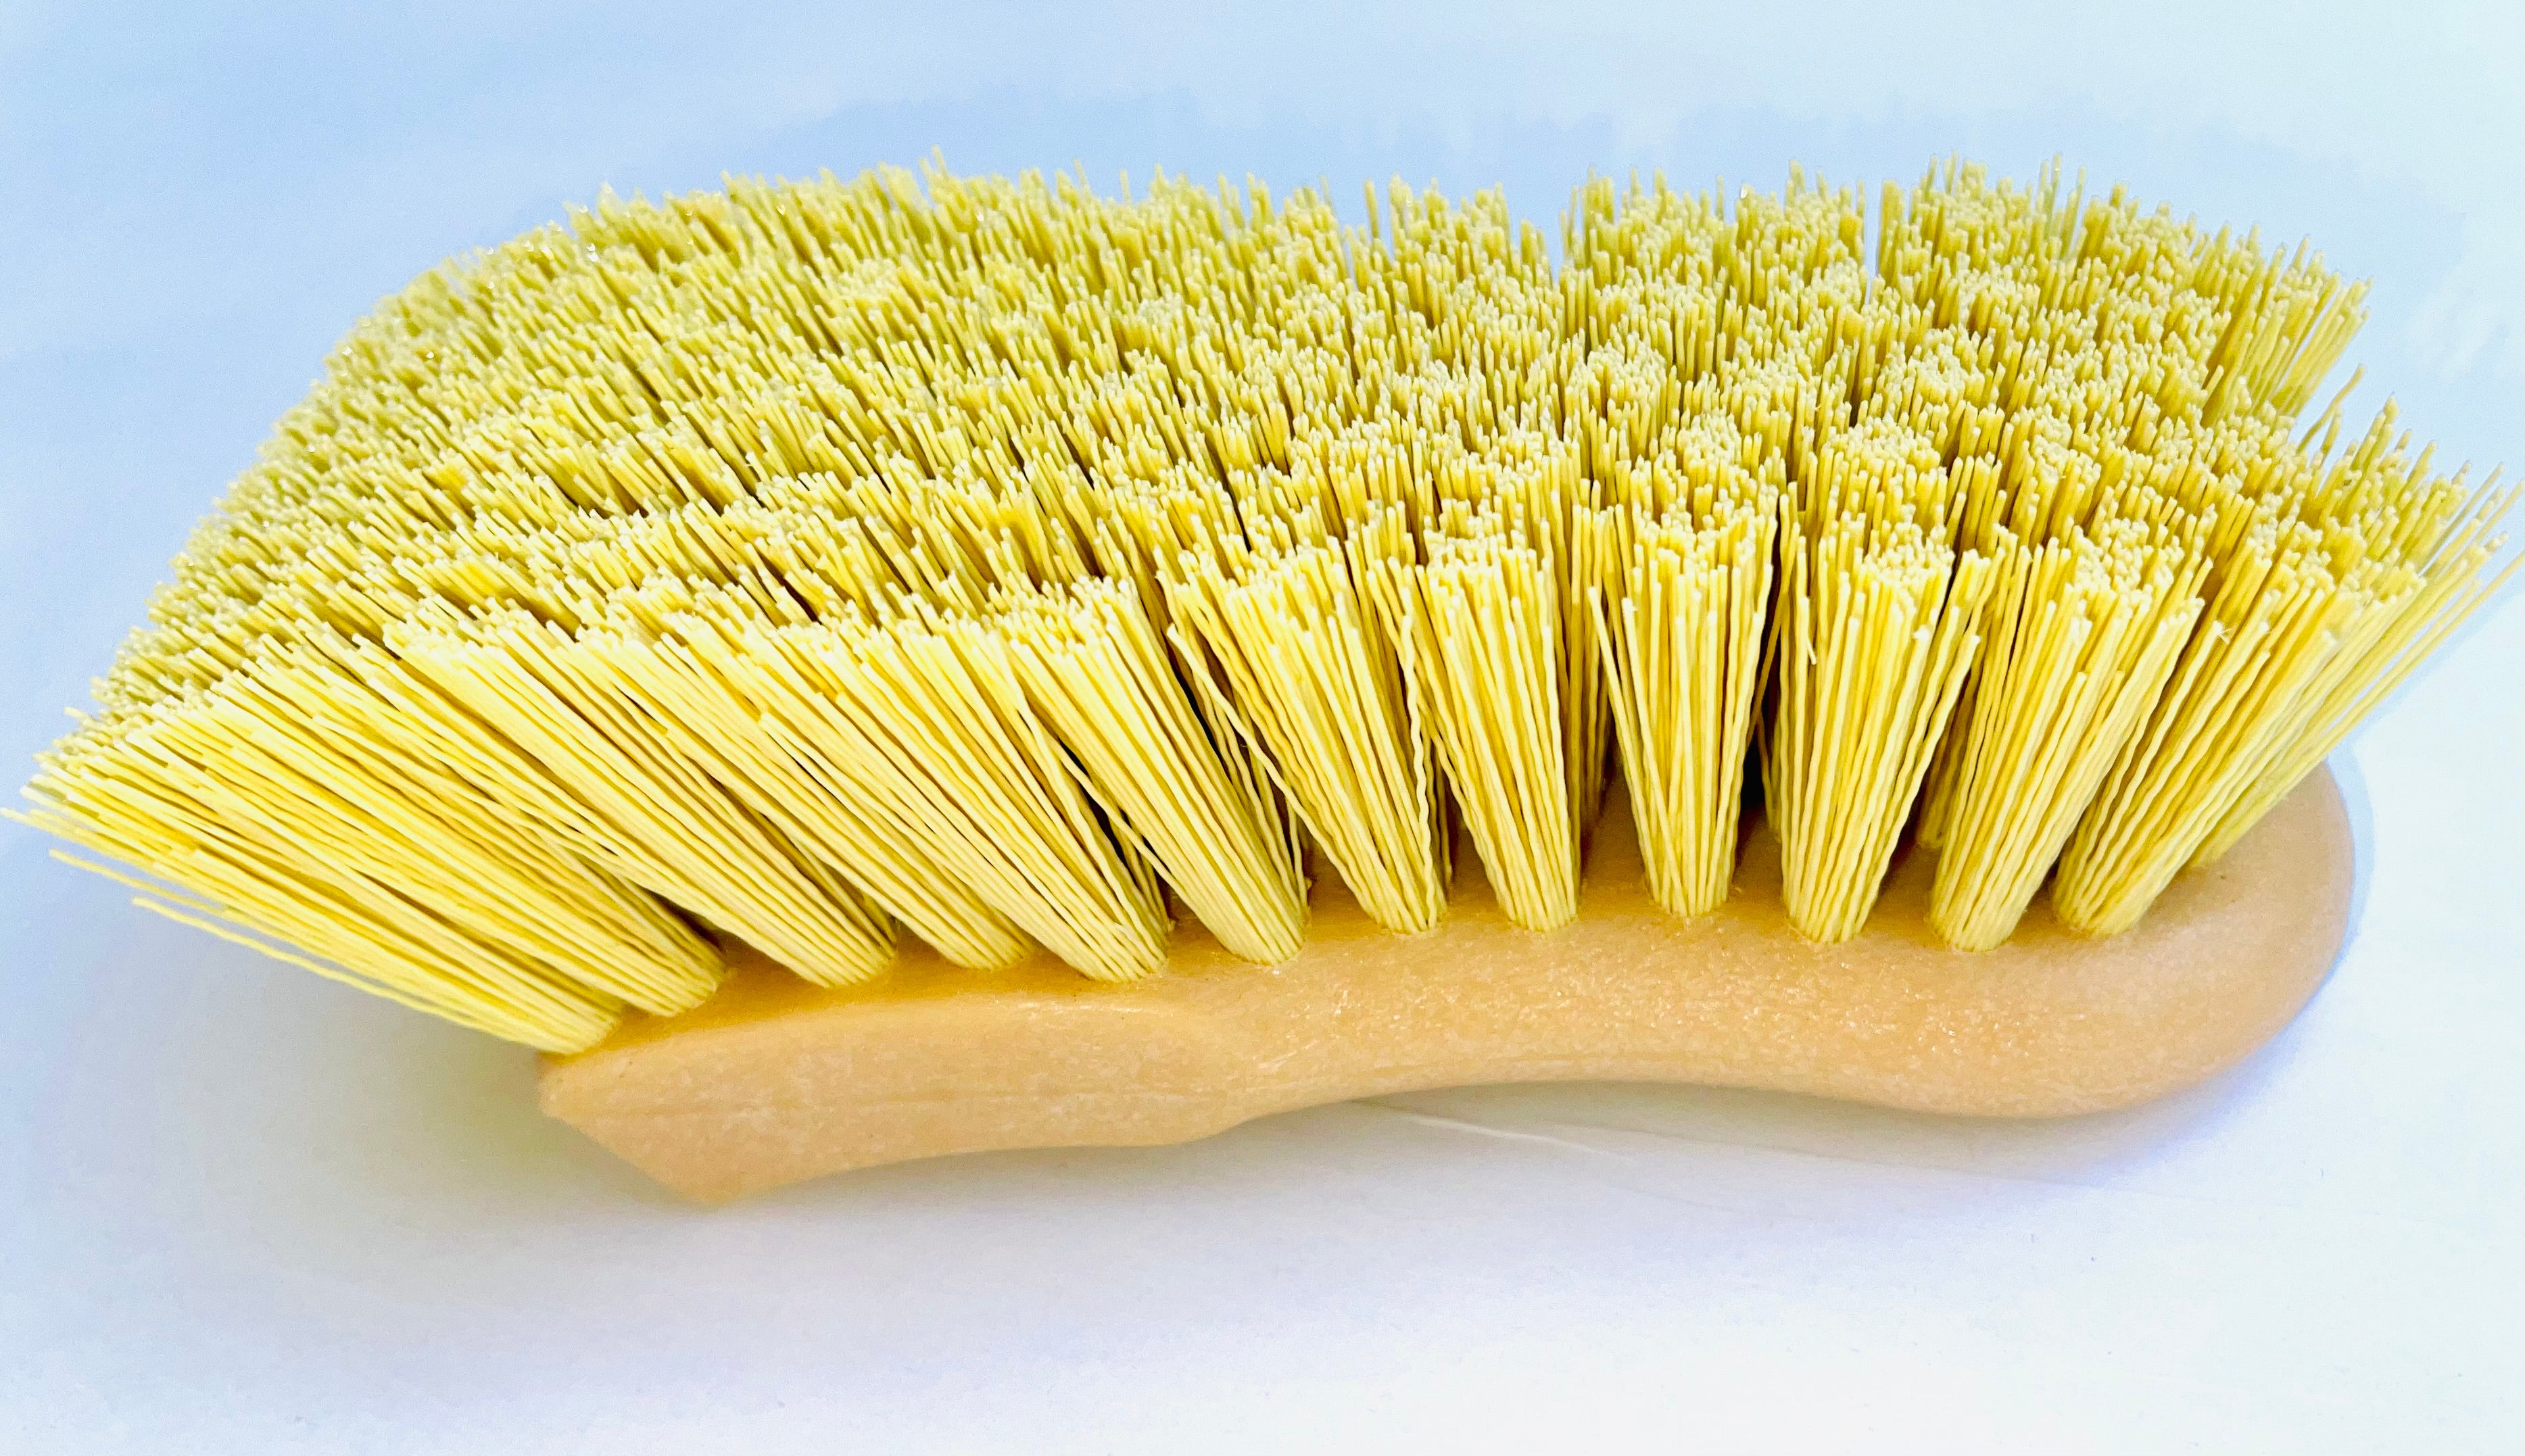 SM Arnold Leather Cleaning Brush - Detailing World